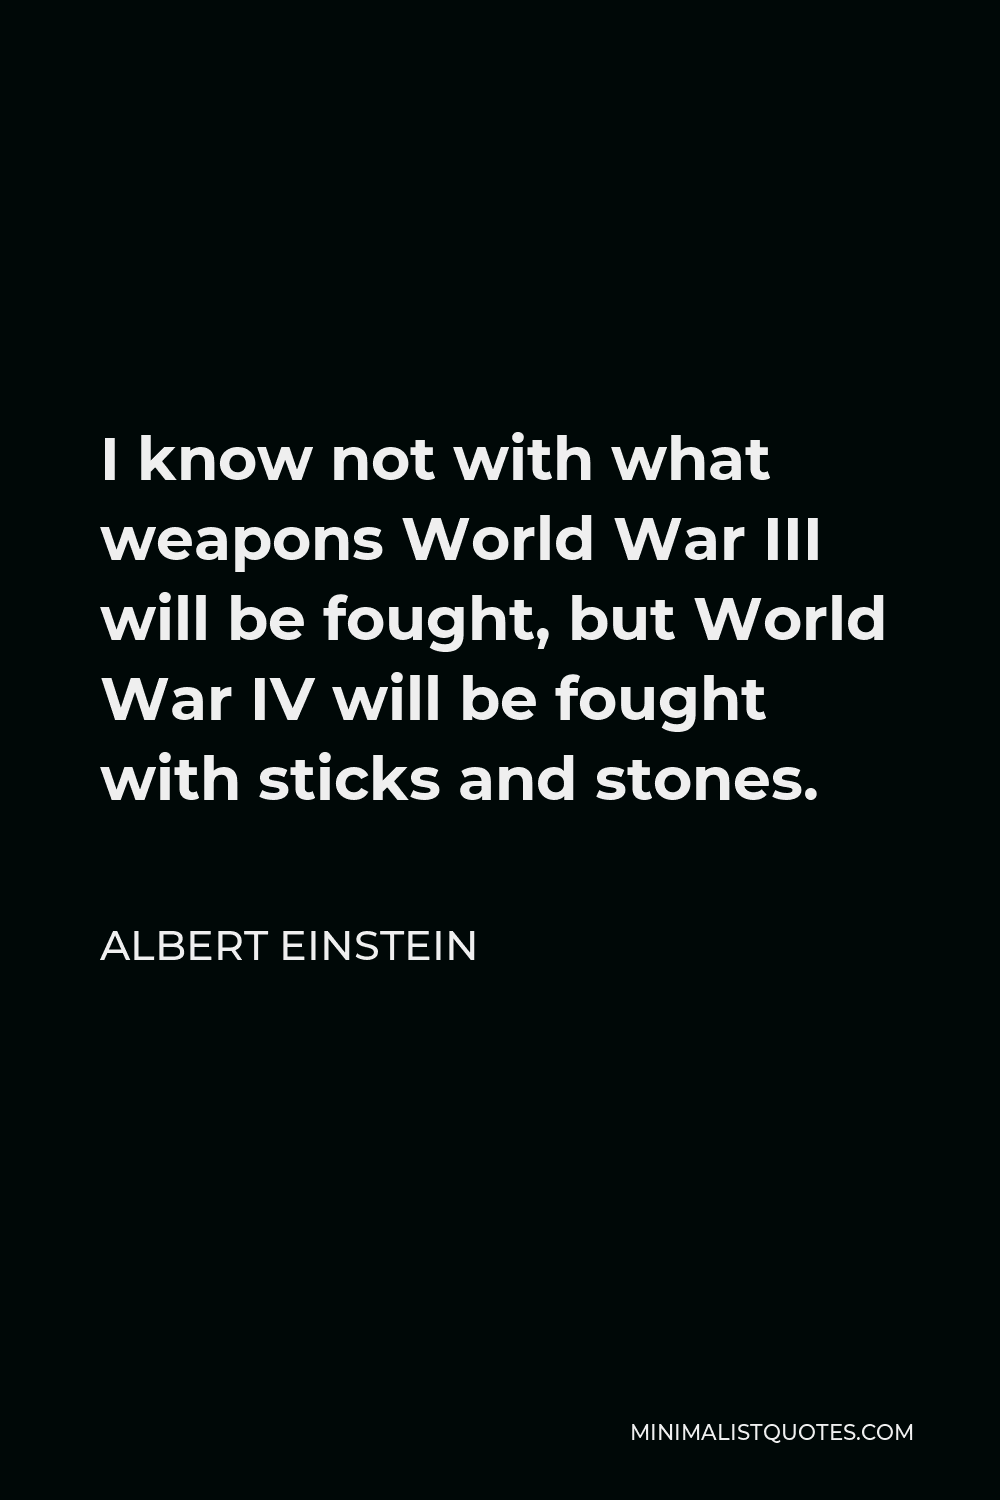 Albert Einstein Quote - I know not with what weapons World War III will be fought, but World War IV will be fought with sticks and stones.